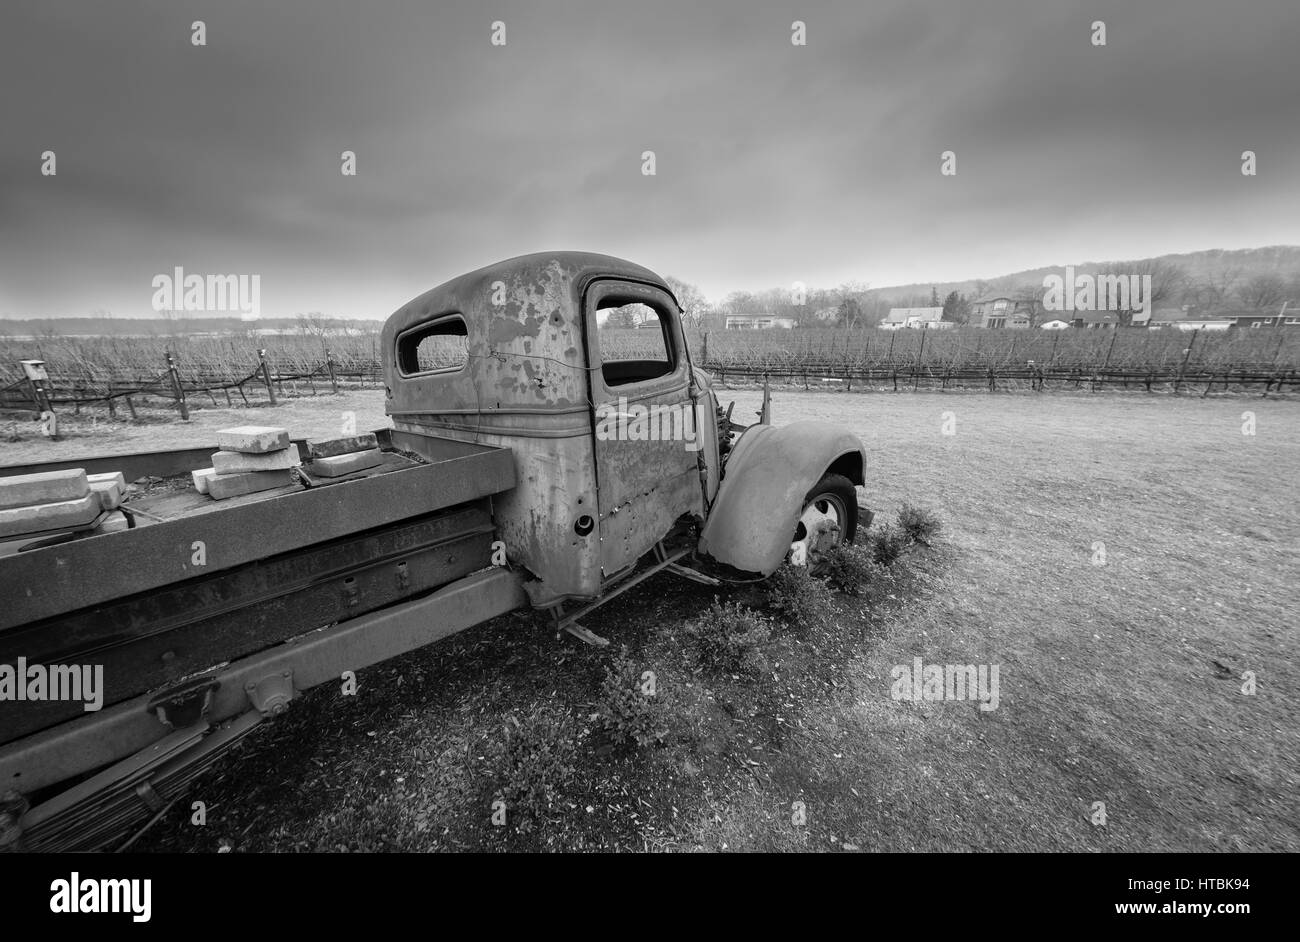 A black and white image of a rusty old truck with bullet holes in the door. Stock Photo